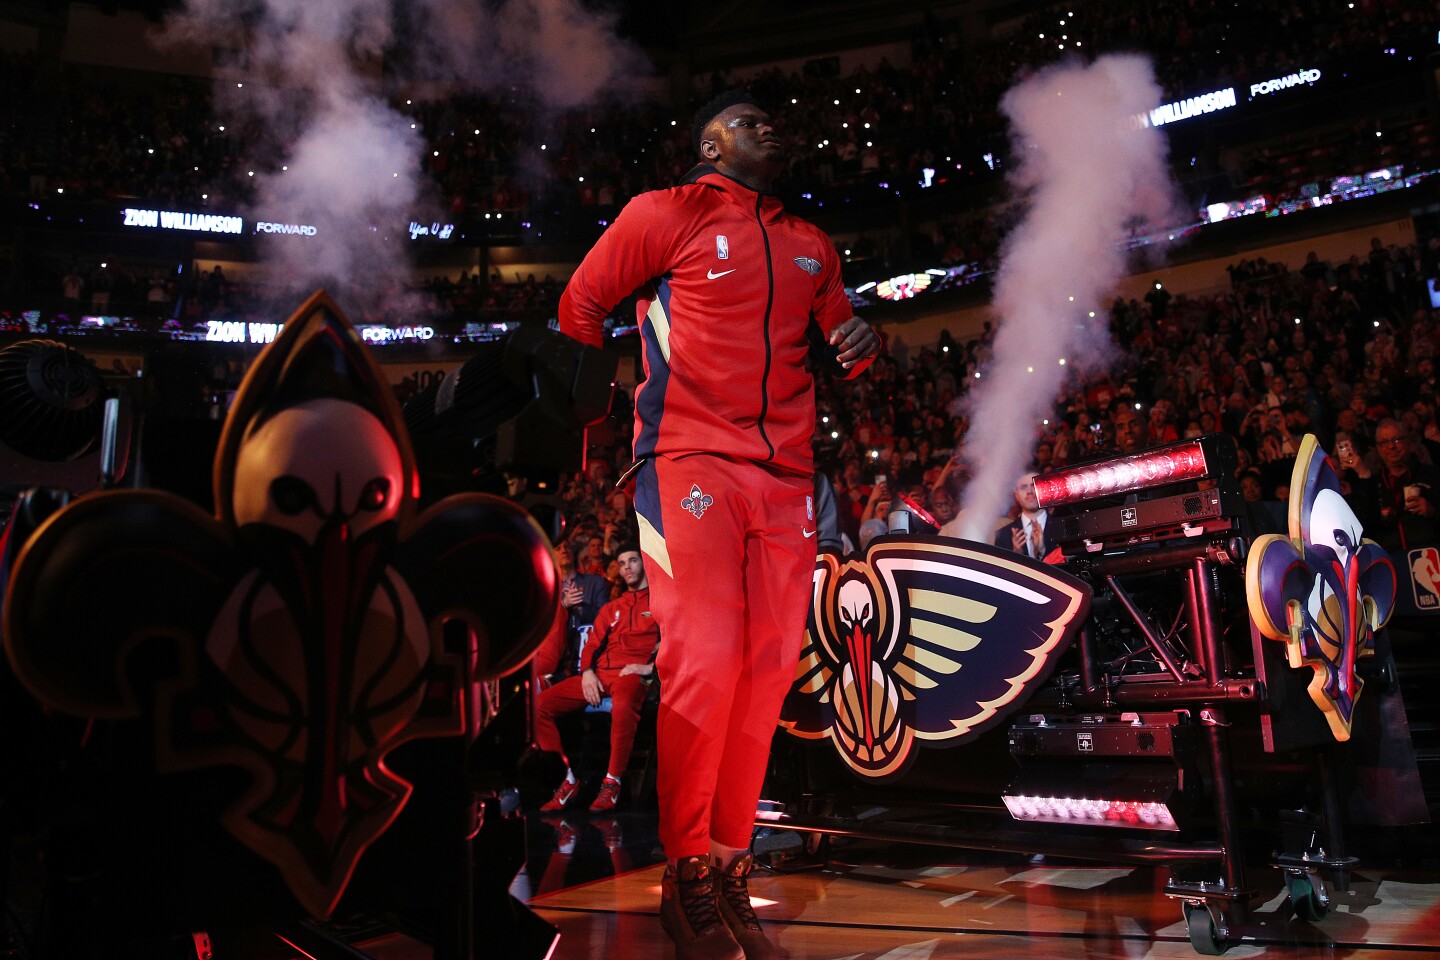 Pelicans rookie Zion Williamson is introduced before his debut game against the Spurs on Jan. 22, 2020, in New Orleans.